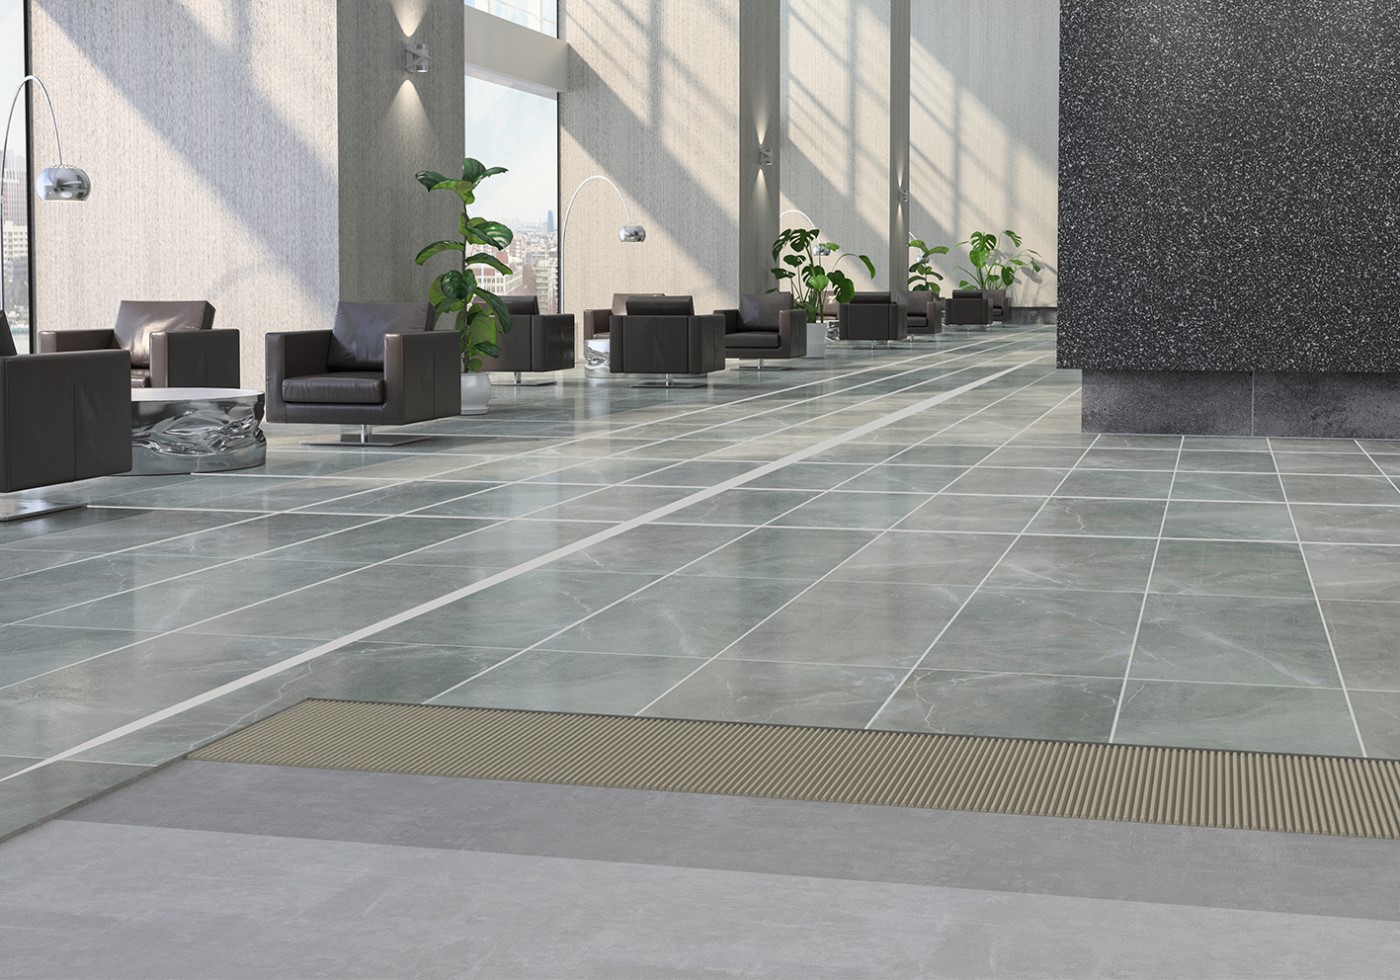 Solutions for Thin and Large Size Ceramic Tile Application on Concrete/Plastered Surfaces 